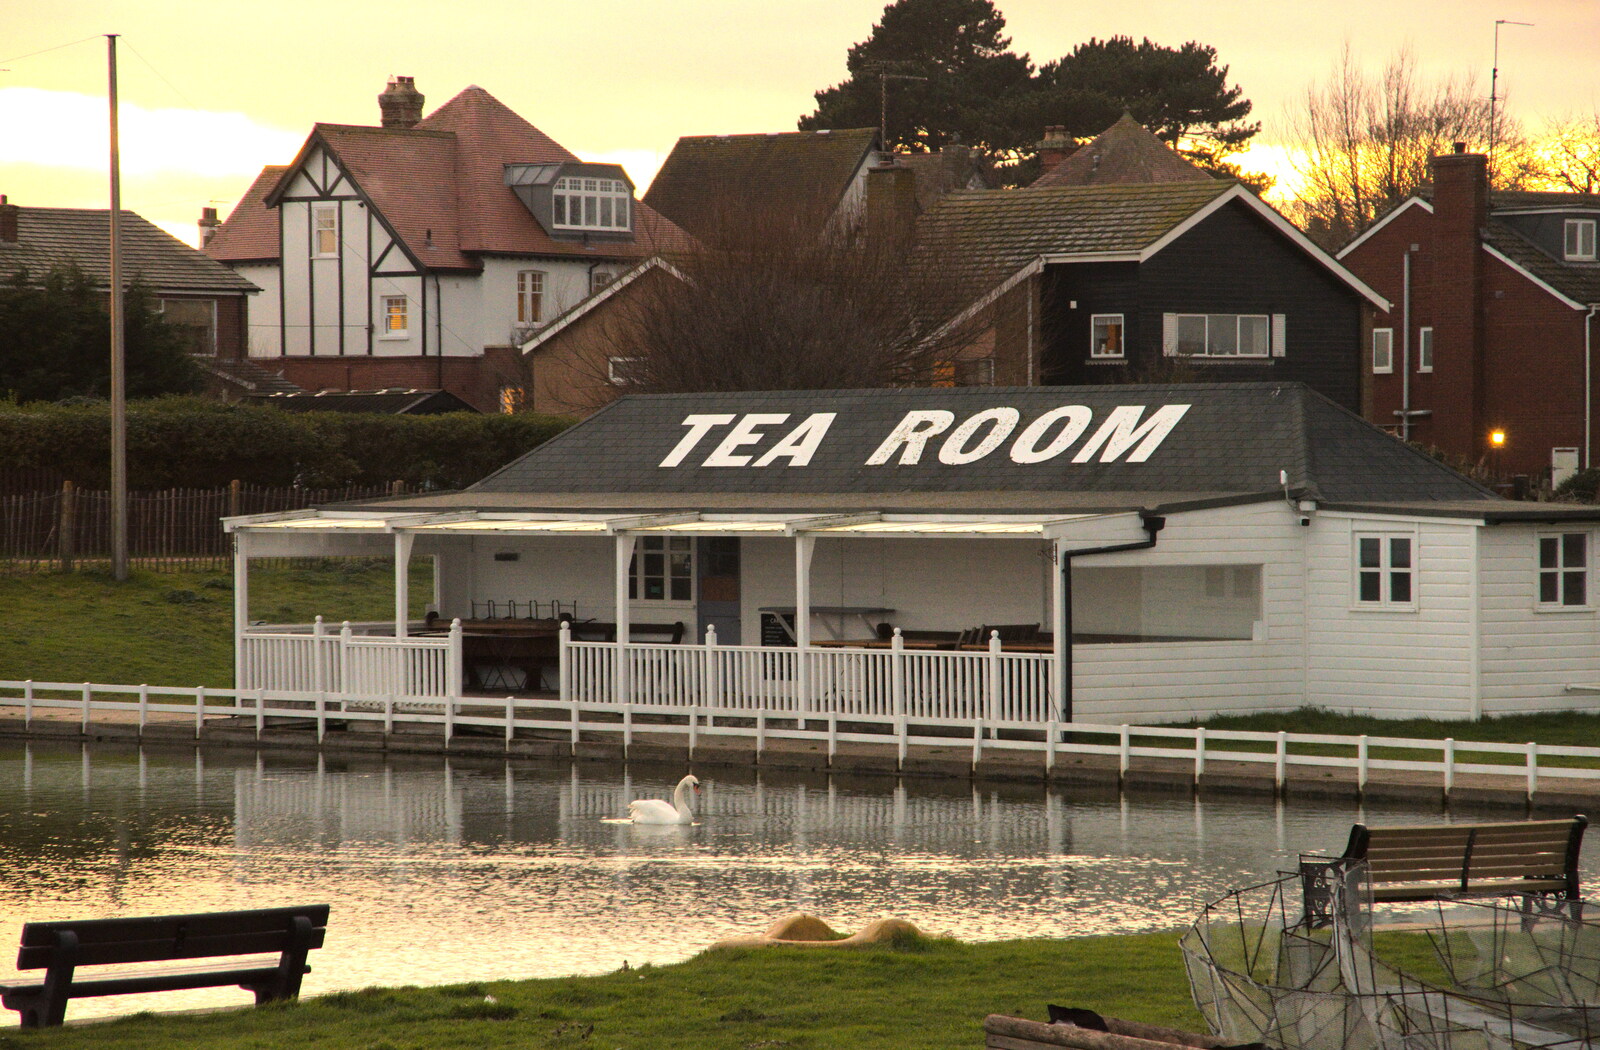 A lone swan floats around by the tea rooms from A Return to the Beach, Southwold, Suffolk - 20th December 2020